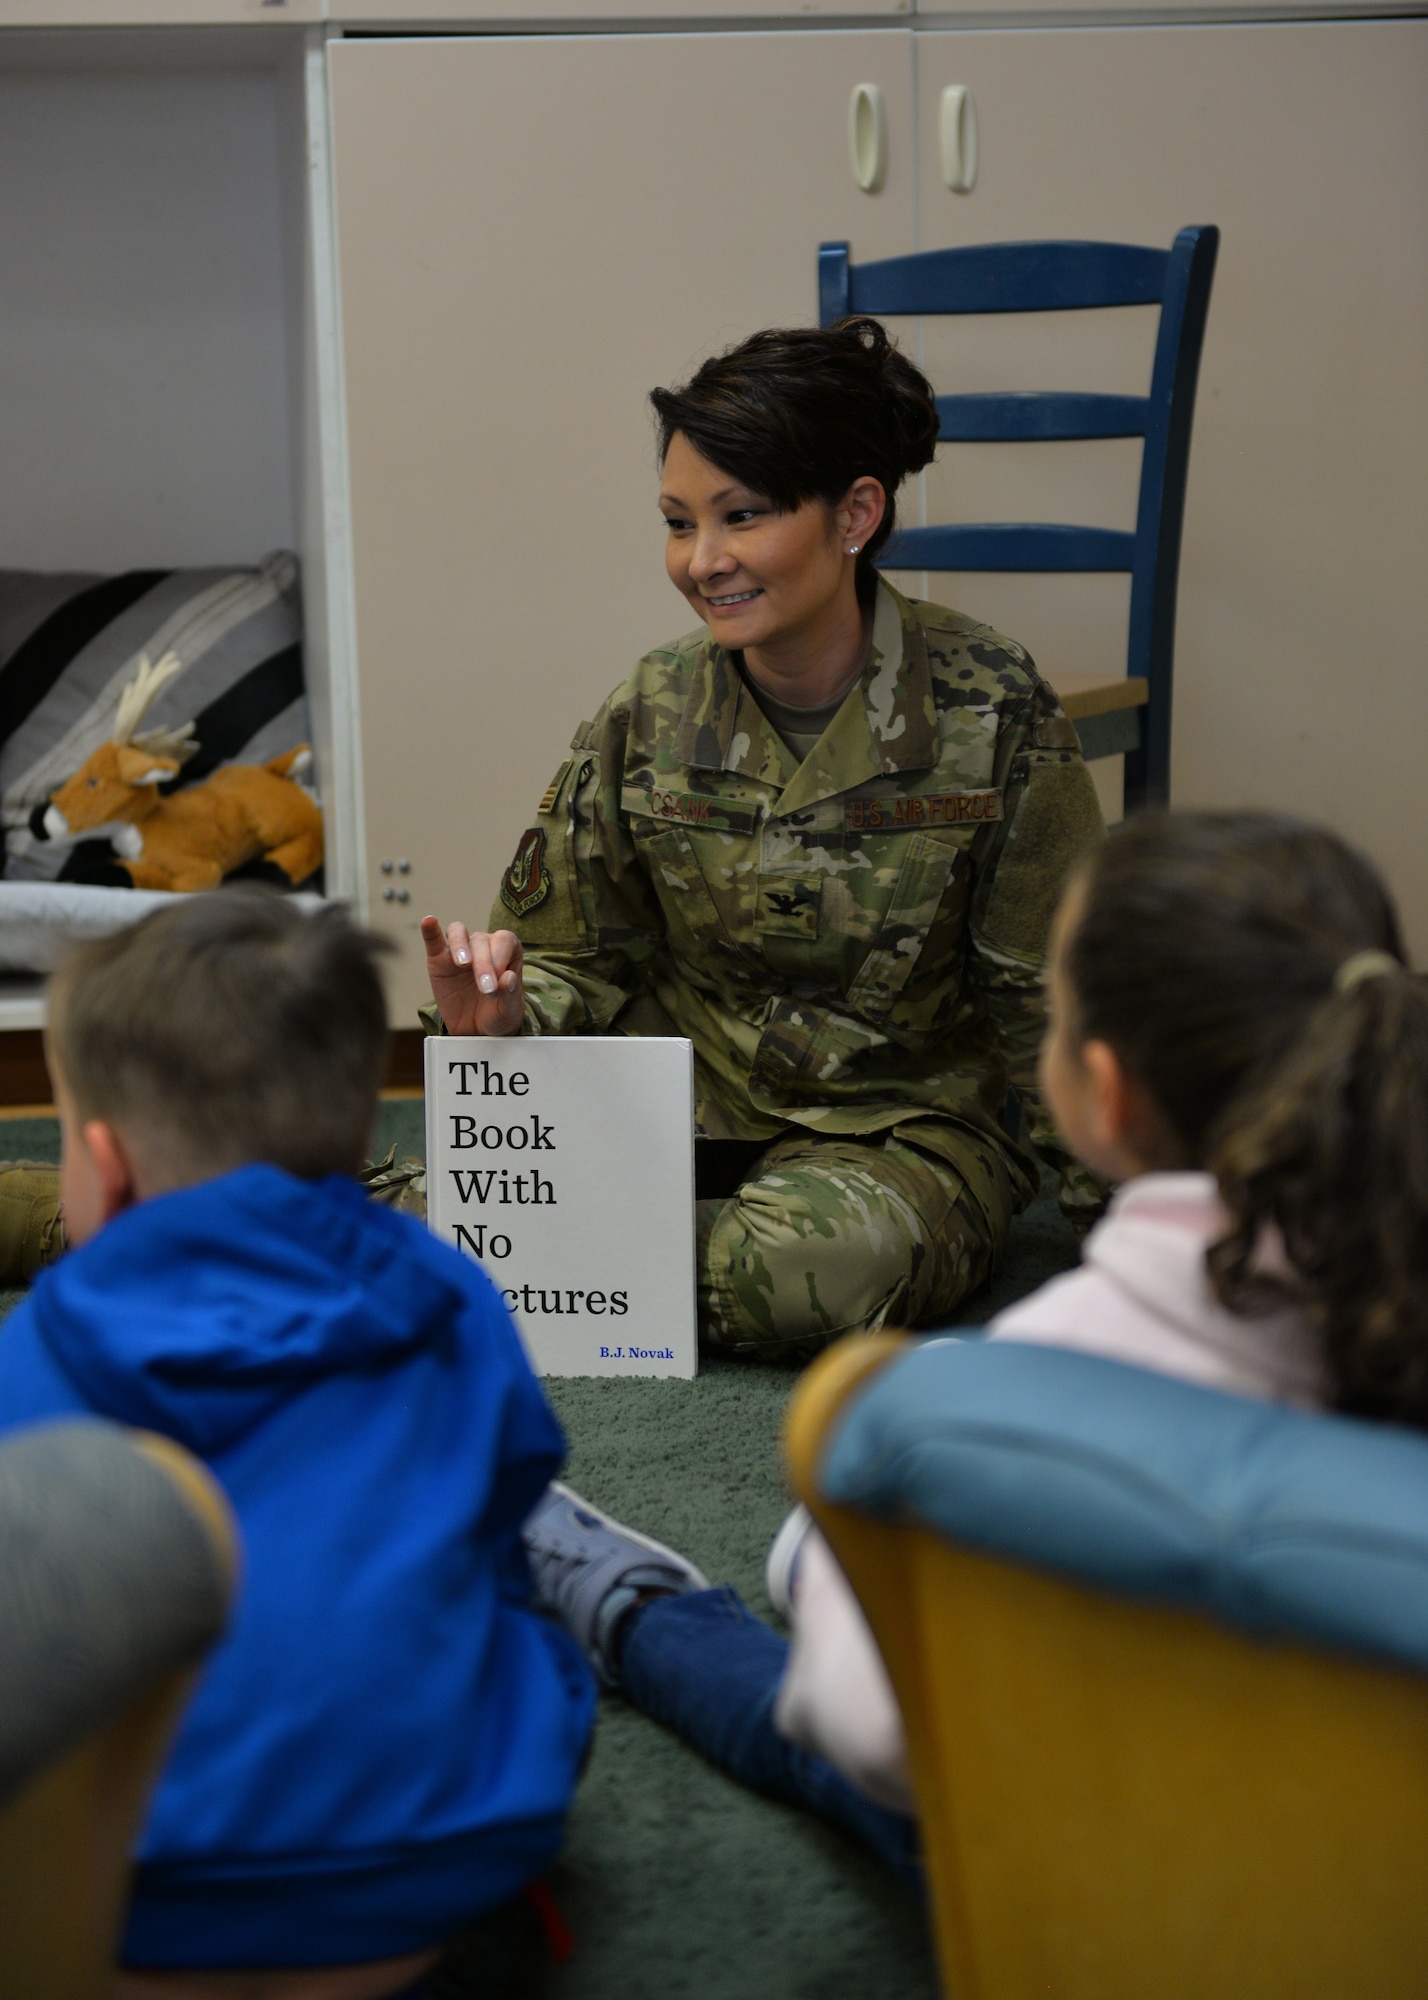 U.S. Air Force Col. Patricia Csànk, Joint Base Elmendorf-Richardson and 673d Air Base Wing commander, interacts with kids at the Denali Child Development Center, JBER, Alaska, April 8, 2019. In honor of Month of the Military Child, Csànk visited the Denali Child Development Center at JBER to read to some of the children. Out of the selection of four books, the kids elected to read “The Book With No Pictures,” by B.J. Novak, knowing all too well what this piece of literature would have Csànk reading aloud.